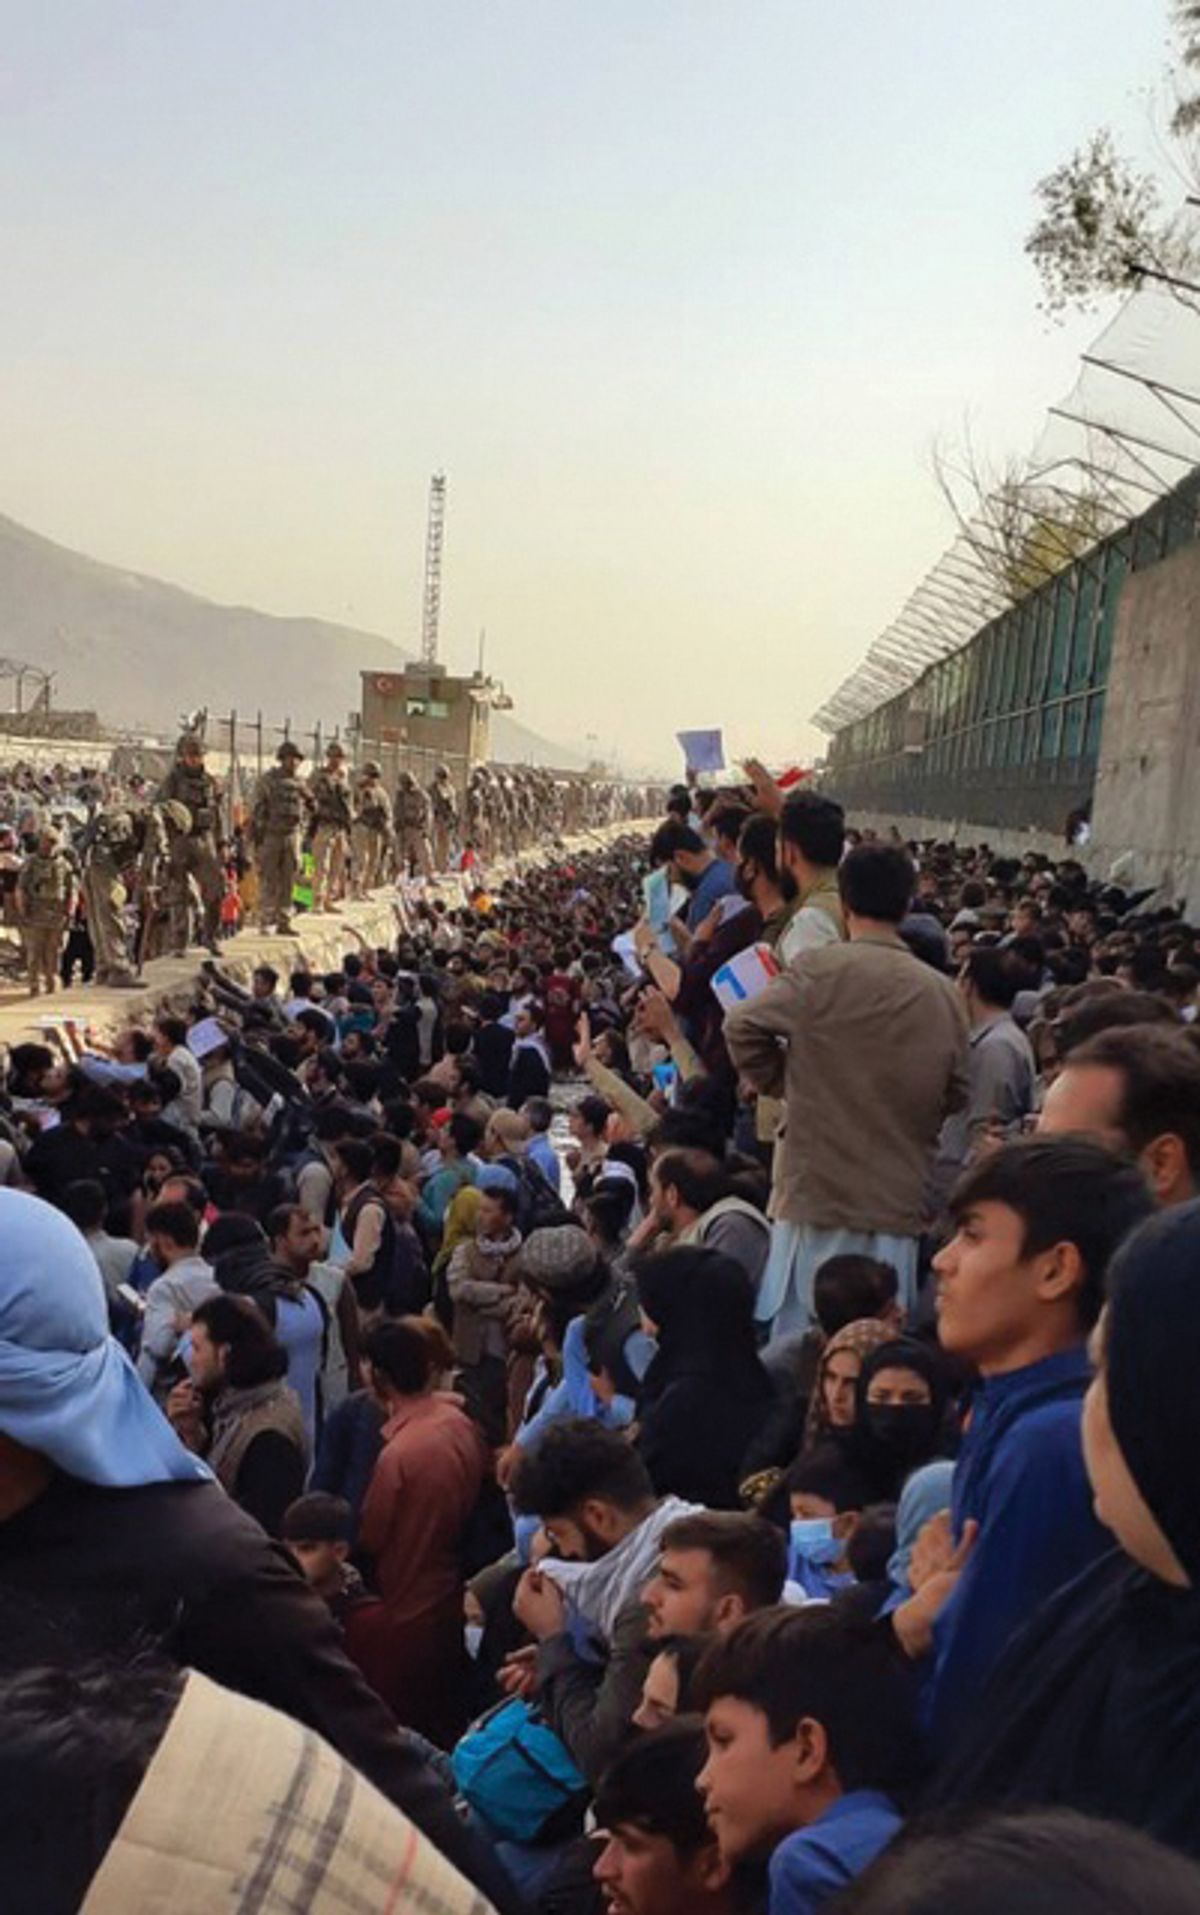 The crowds at Kabul airport’s Abbey Gate full of people hoping to board one of the evacuation flights last month